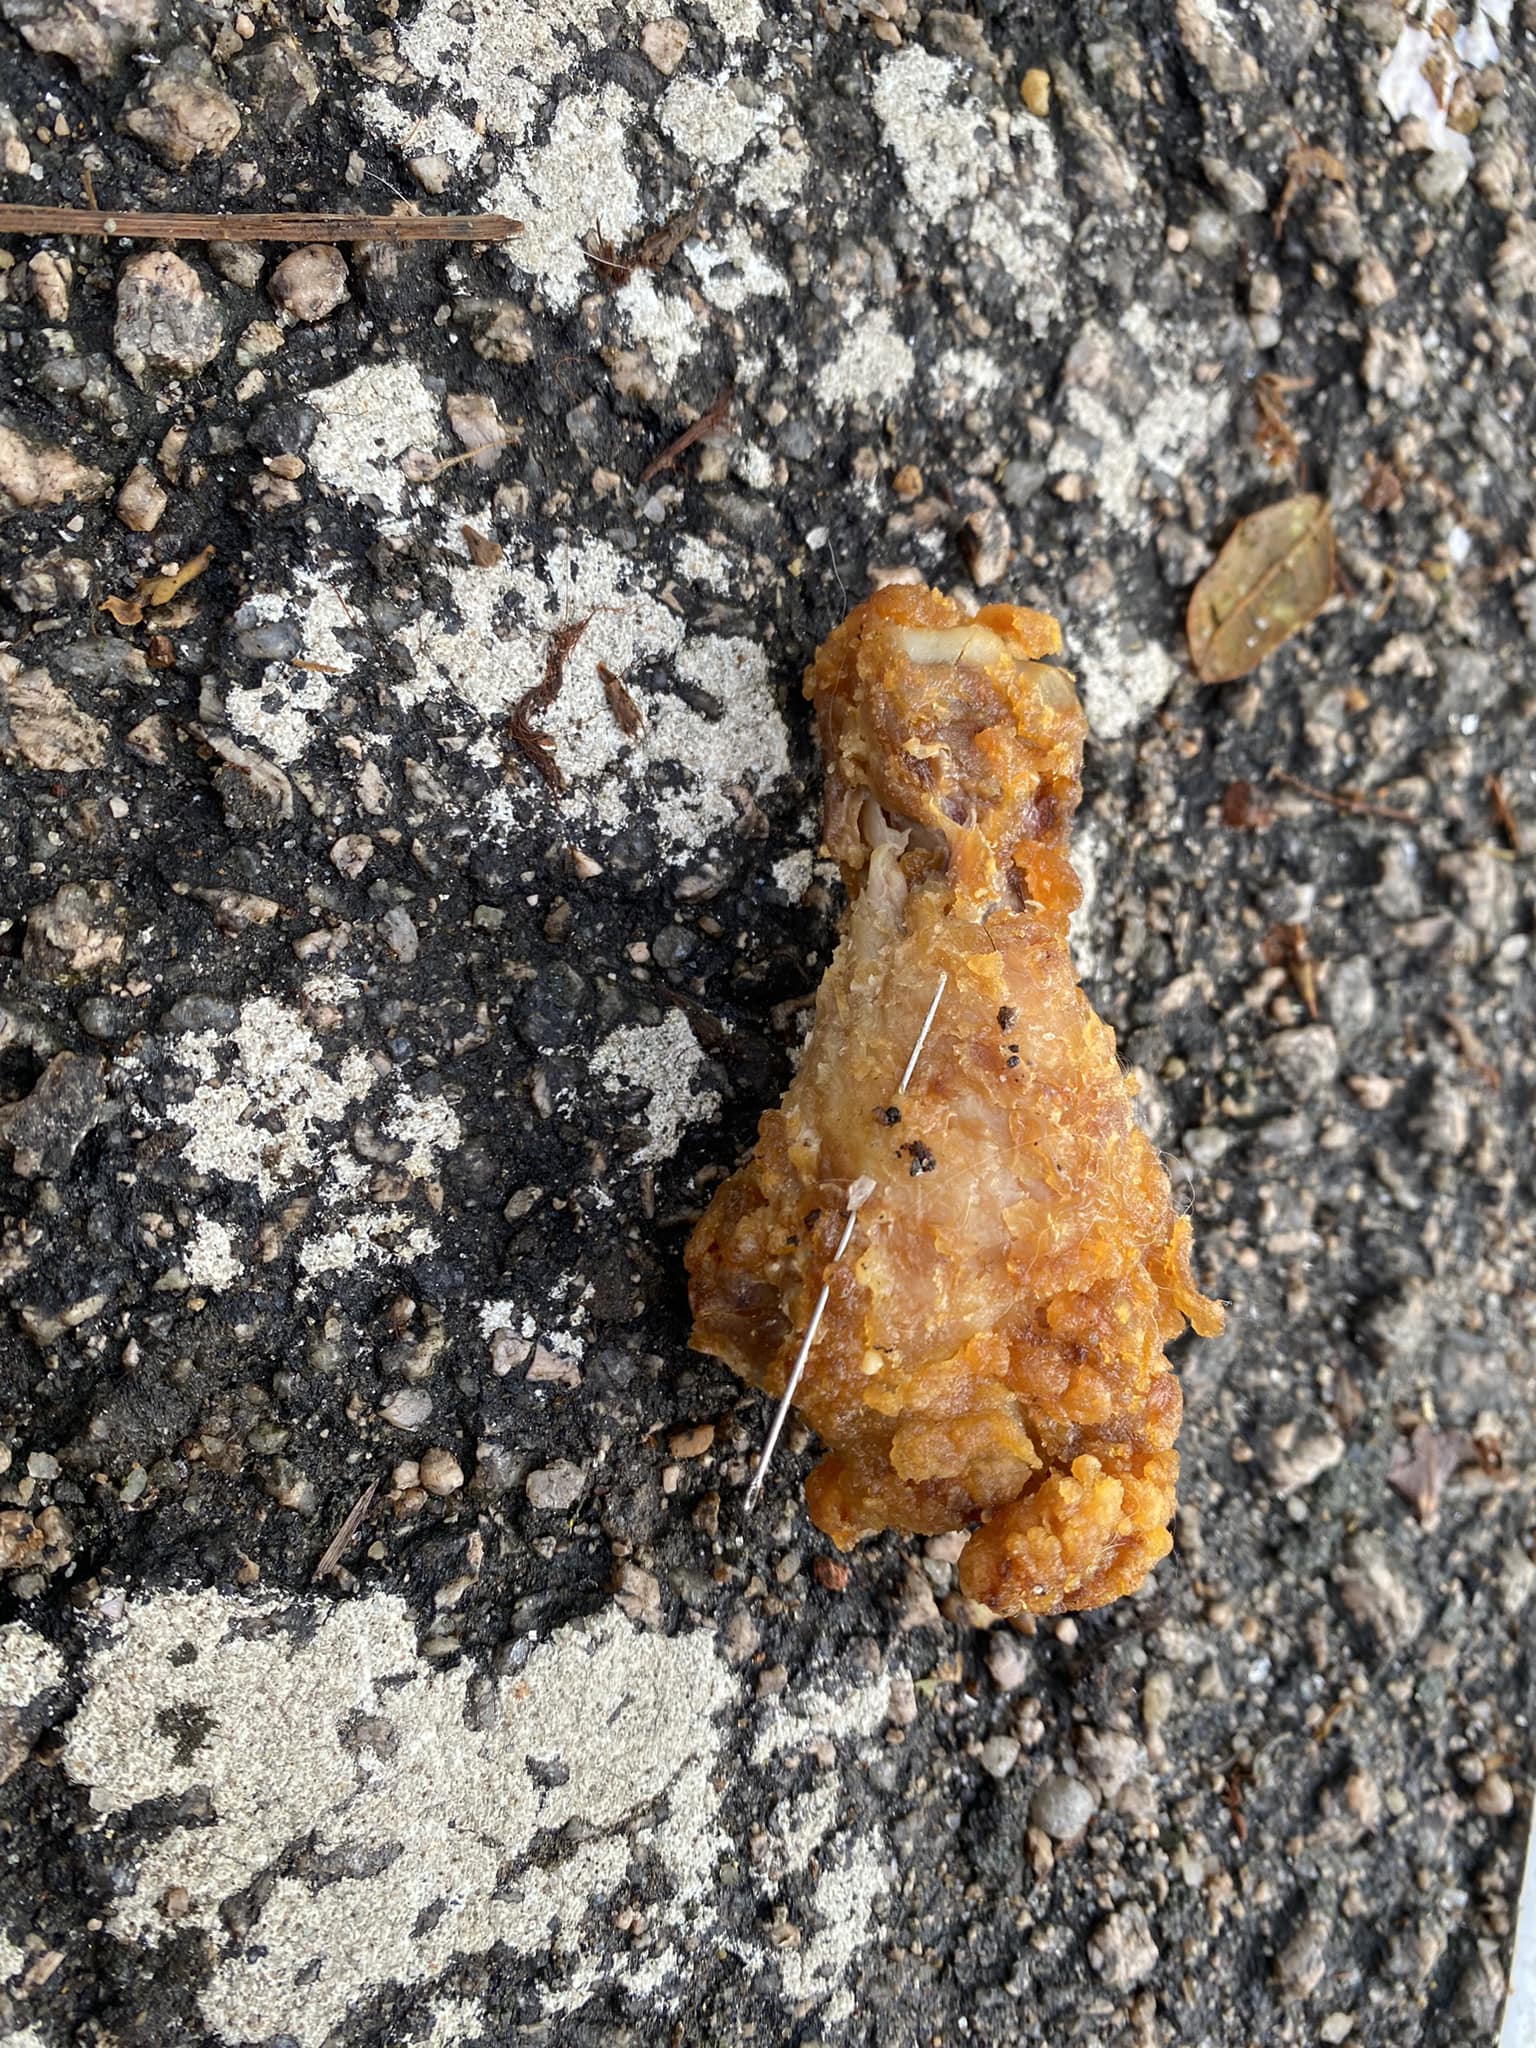 Fried chicken with needle found on road